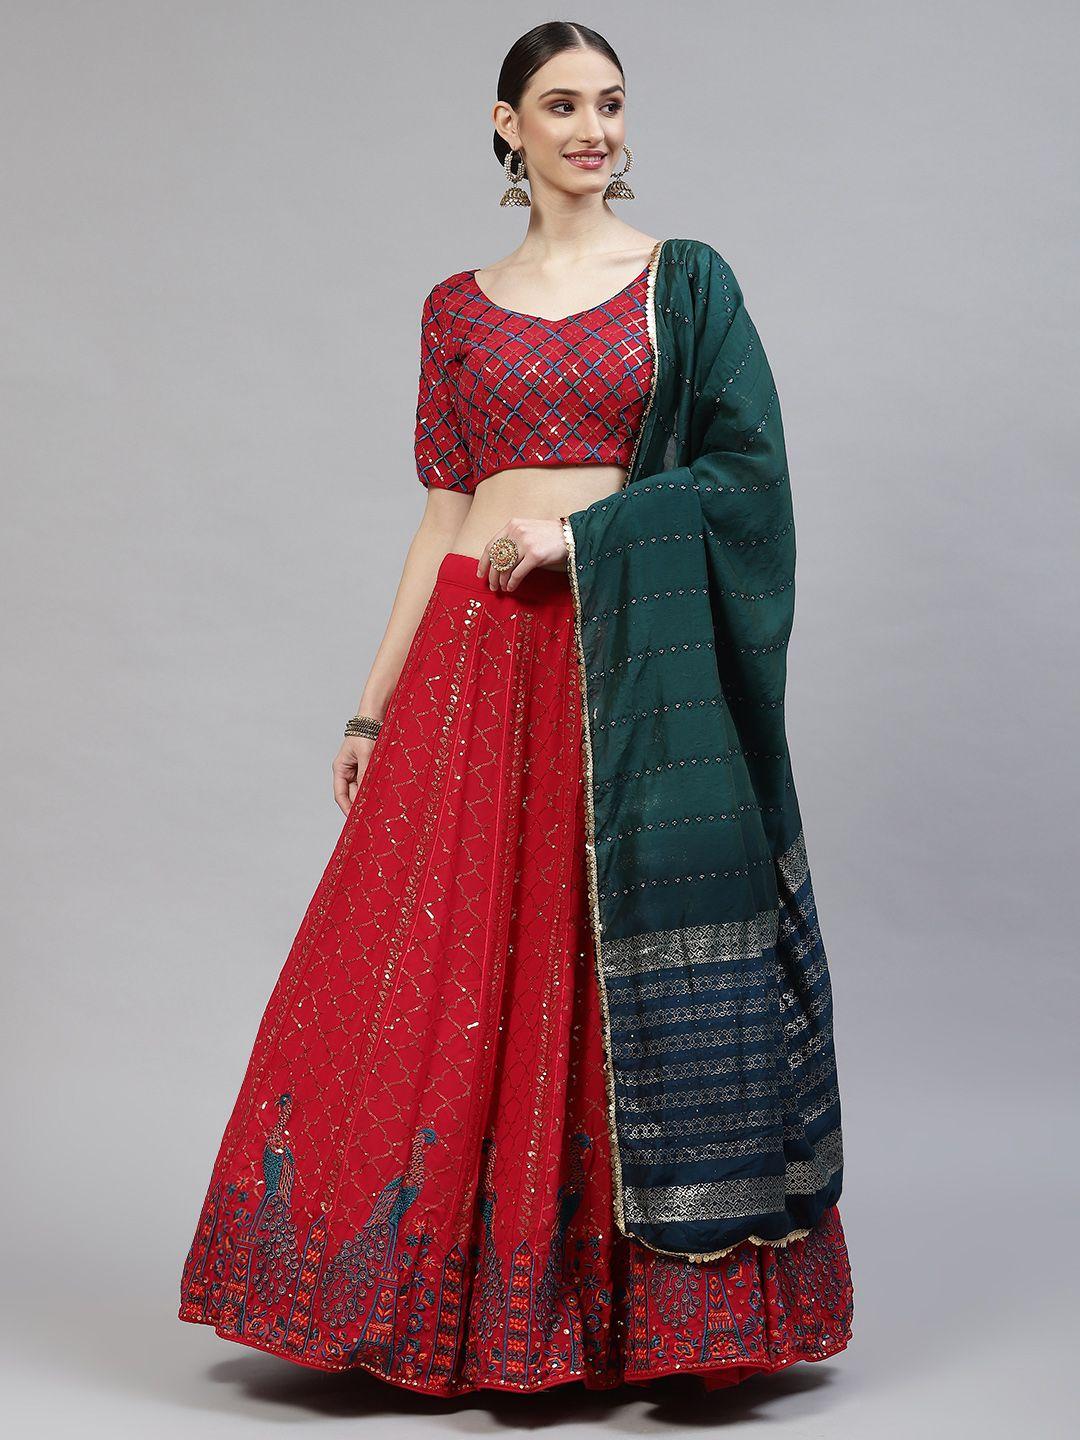 shubhkala red & teal green embroidered semi-stitched lehenga & blouse with dupatta